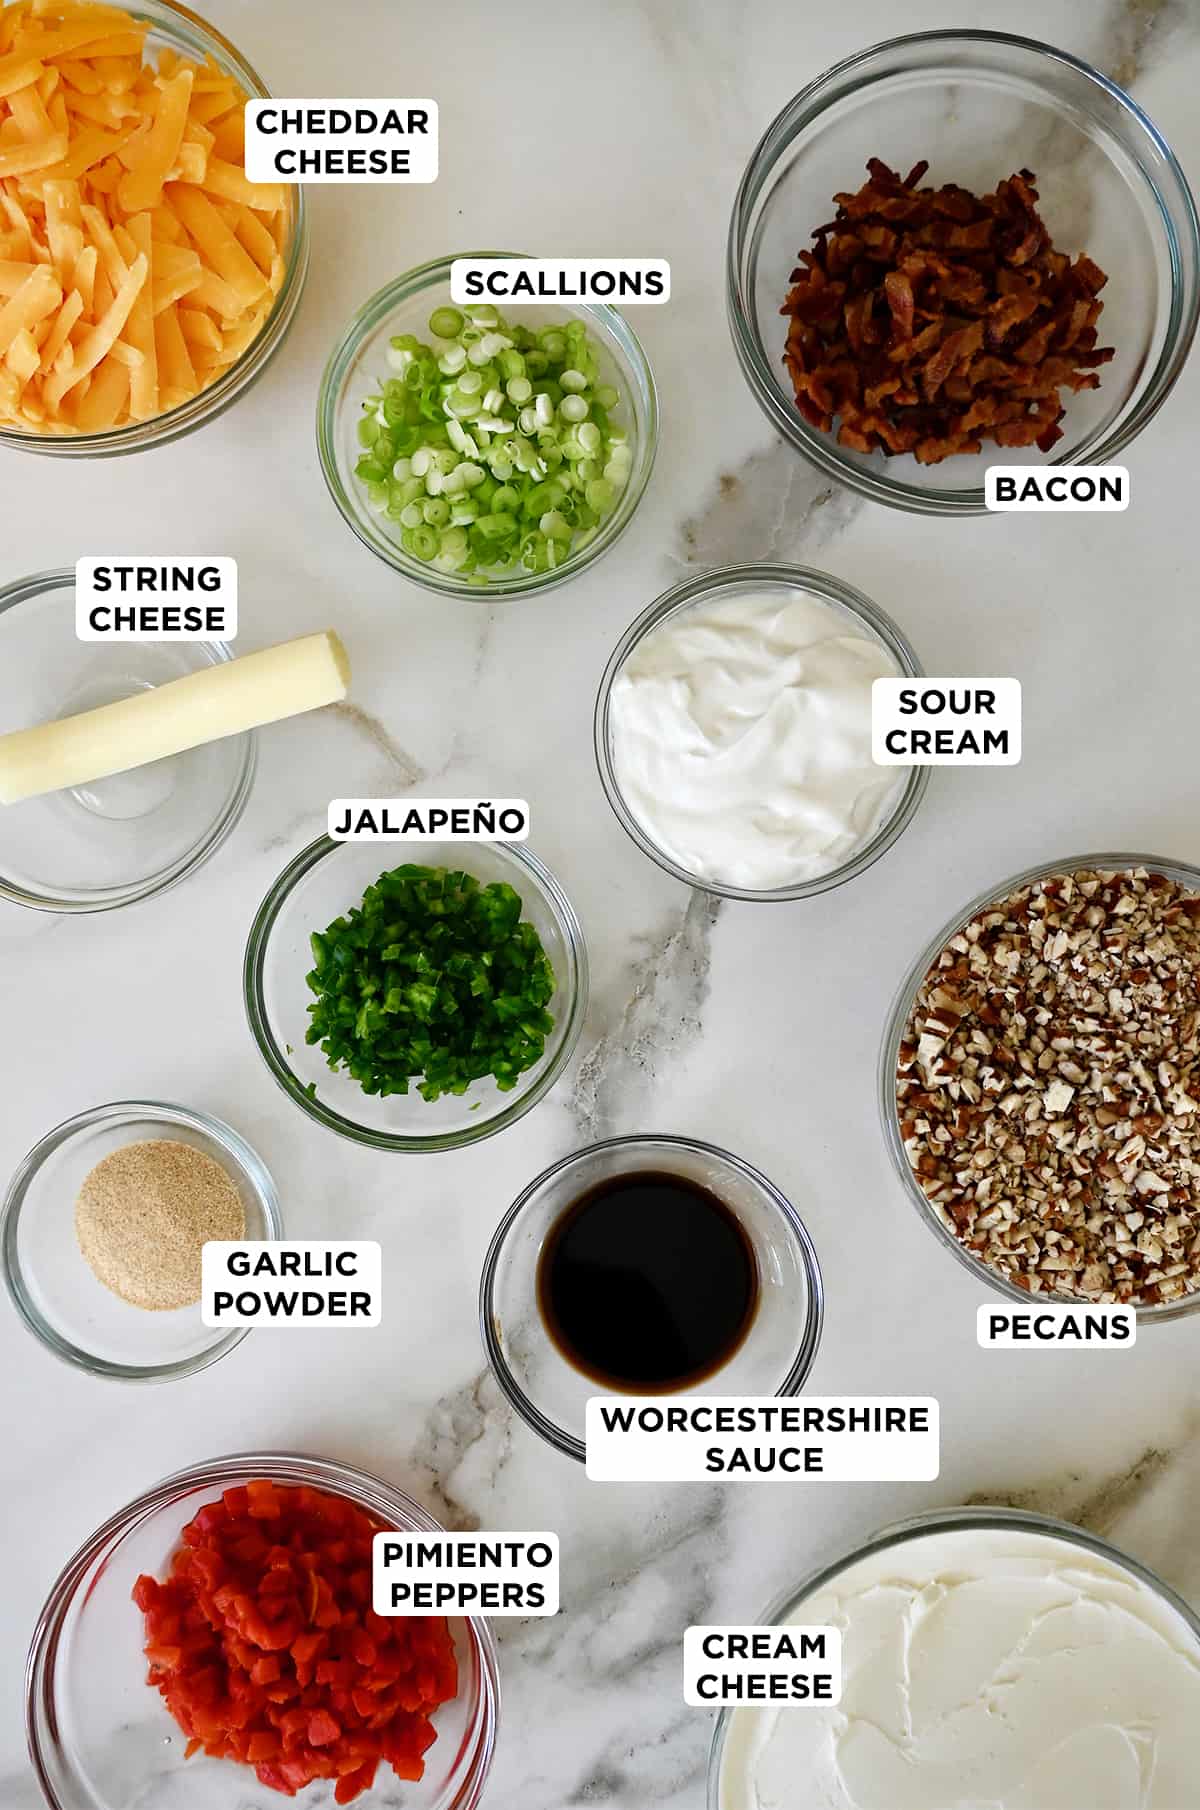 Various sizes of glass bowls containing ingredients to make a cheese ball, including shredded cheddar cheese, sliced scallions, crispy bacon, sour cream, diced jalapeño, string cheese, garlic powder, Worcestershire sauce, crushed pecans and pimento peppers.